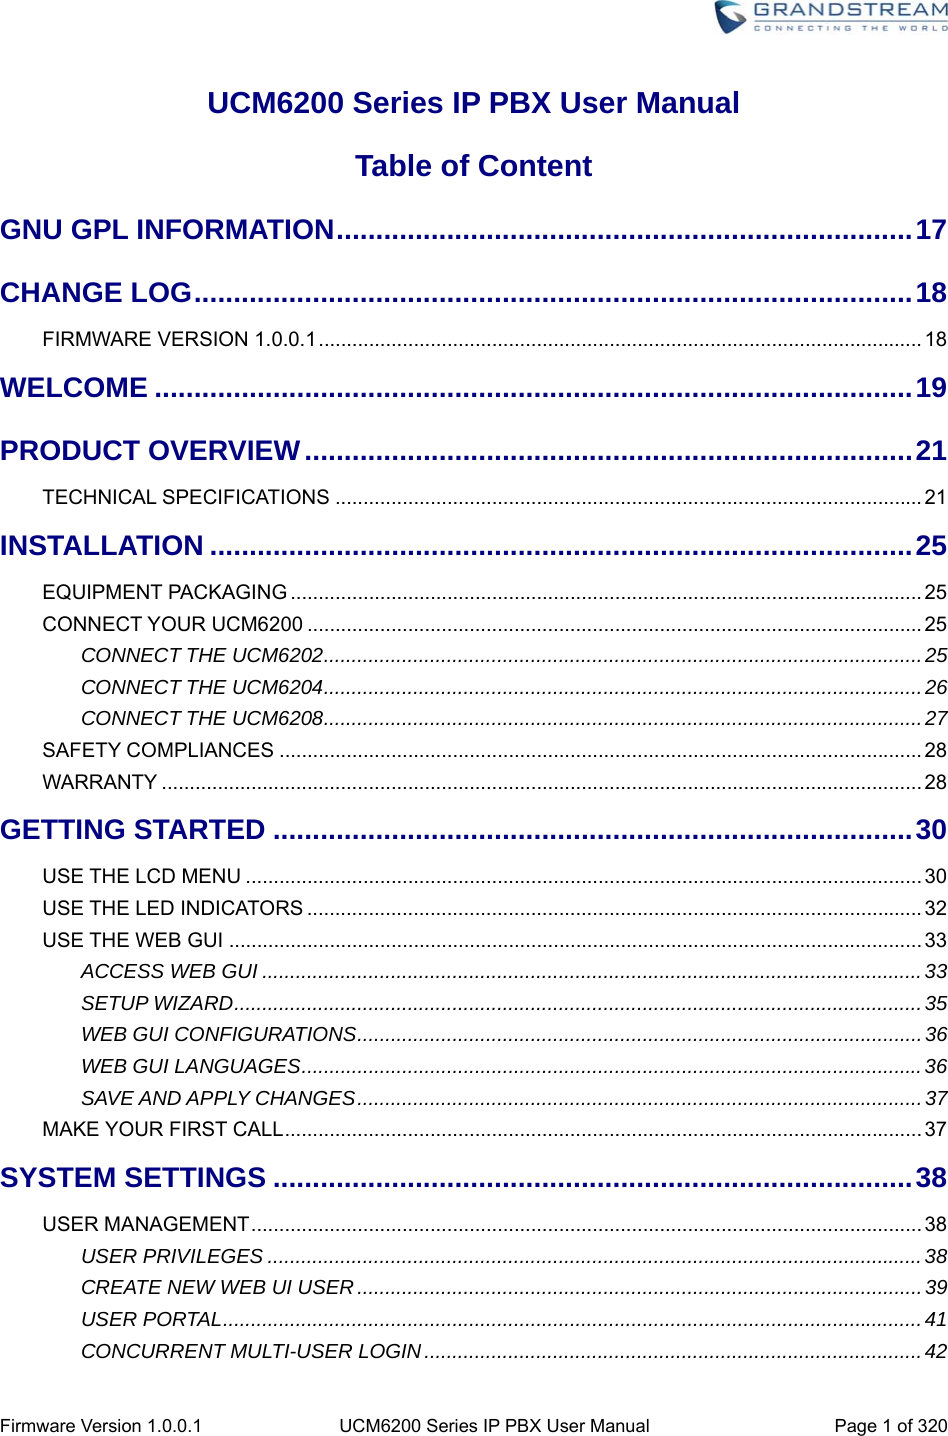  Firmware Version 1.0.0.1  UCM6200 Series IP PBX User Manual  Page 1 of 320 UCM6200 Series IP PBX User Manual Table of Content GNU GPL INFORMATION ......................................................................... 17CHANGE LOG ........................................................................................... 18FIRMWARE VERSION 1.0.0.1 ............................................................................................................ 18WELCOME ................................................................................................ 19PRODUCT OVERVIEW ............................................................................. 21TECHNICAL SPECIFICATIONS ......................................................................................................... 21INSTALLATION ......................................................................................... 25EQUIPMENT PACKAGING ................................................................................................................. 25CONNECT YOUR UCM6200 .............................................................................................................. 25CONNECT THE UCM6202 ........................................................................................................... 25CONNECT THE UCM6204 ........................................................................................................... 26CONNECT THE UCM6208 ........................................................................................................... 27SAFETY COMPLIANCES ................................................................................................................... 28WARRANTY ........................................................................................................................................ 28GETTING STARTED ................................................................................. 30USE THE LCD MENU ......................................................................................................................... 30USE THE LED INDICATORS .............................................................................................................. 32USE THE WEB GUI ............................................................................................................................ 33ACCESS WEB GUI ...................................................................................................................... 33SETUP WIZARD ........................................................................................................................... 35WEB GUI CONFIGURATIONS ..................................................................................................... 36WEB GUI LANGUAGES ............................................................................................................... 36SAVE AND APPLY CHANGES ..................................................................................................... 37MAKE YOUR FIRST CALL .................................................................................................................. 37SYSTEM SETTINGS ................................................................................. 38USER MANAGEMENT ........................................................................................................................ 38USER PRIVILEGES ..................................................................................................................... 38CREATE NEW WEB UI USER ..................................................................................................... 39USER PORTAL ............................................................................................................................. 41CONCURRENT MULTI-USER LOGIN ......................................................................................... 42